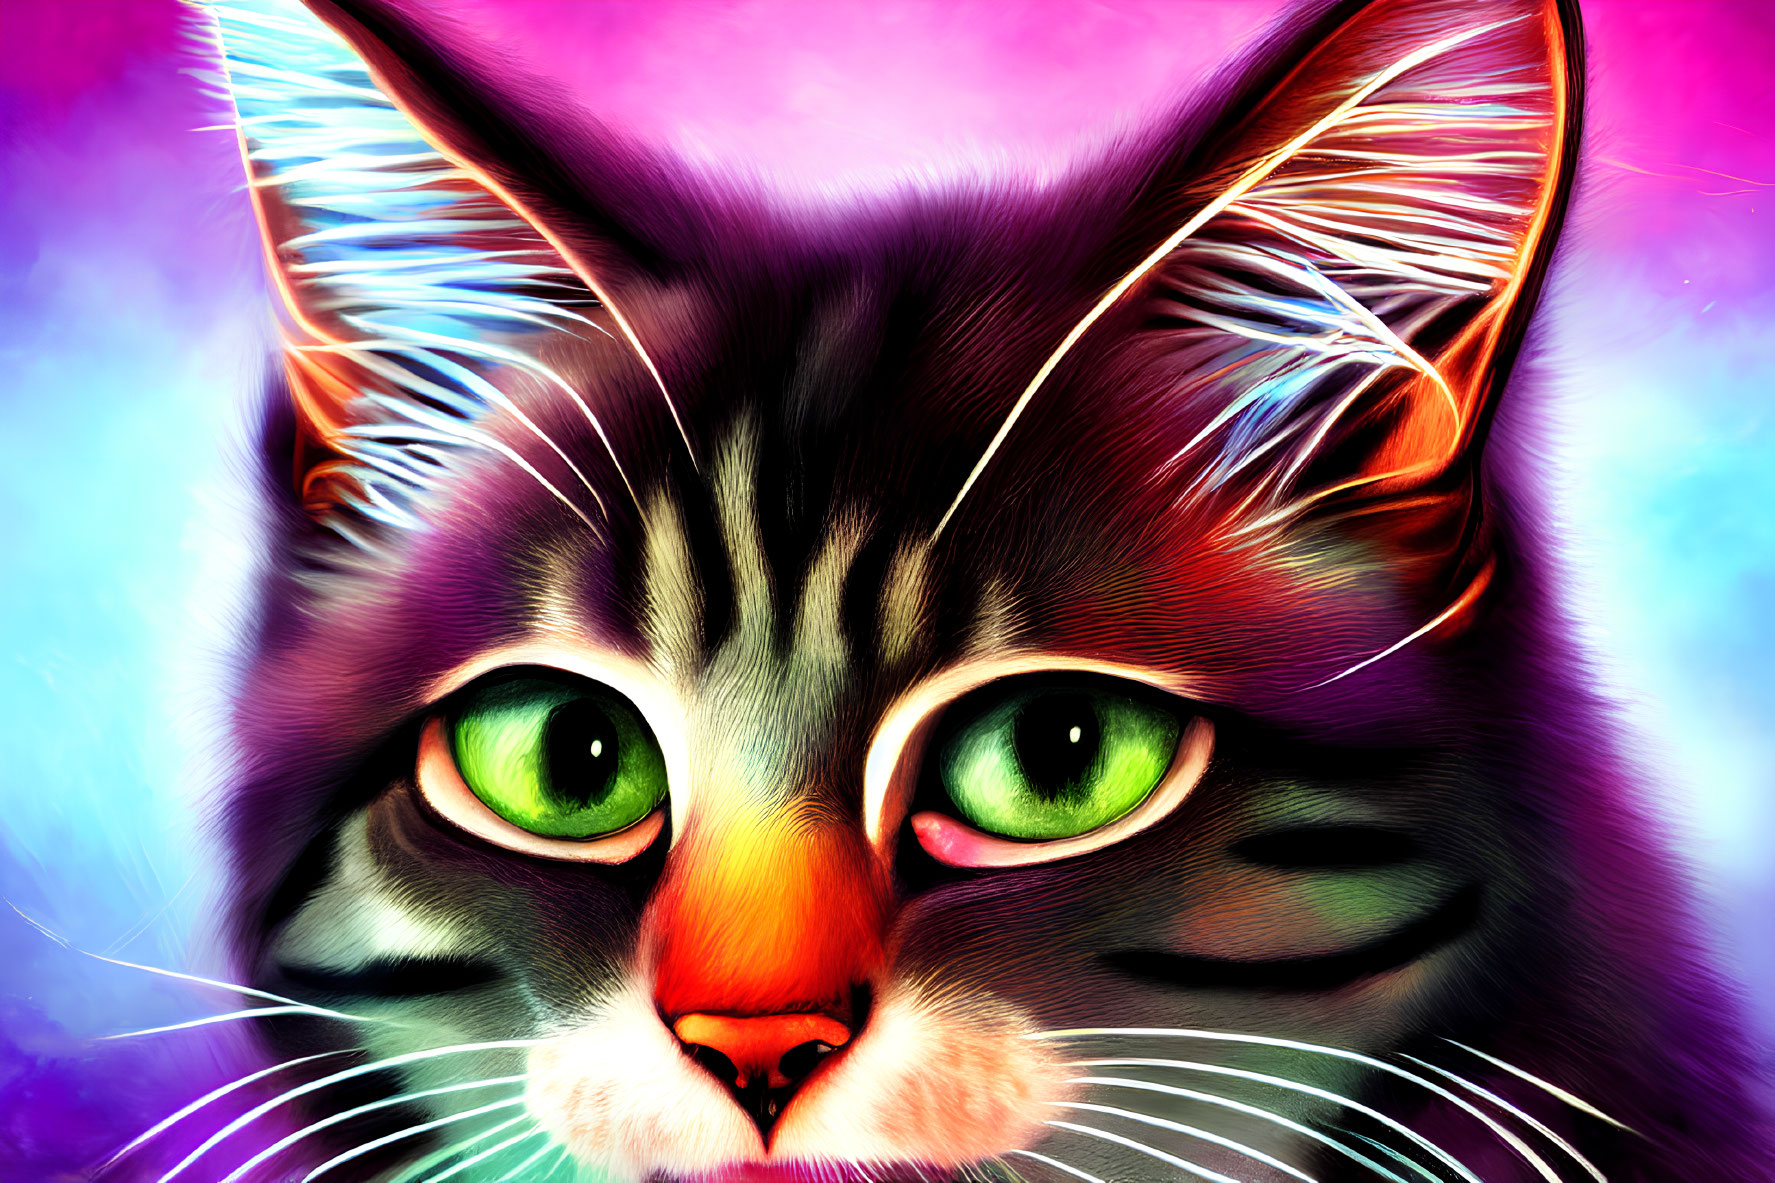 Colorful Digital Art: Tabby Cat Portrait with Green Eyes